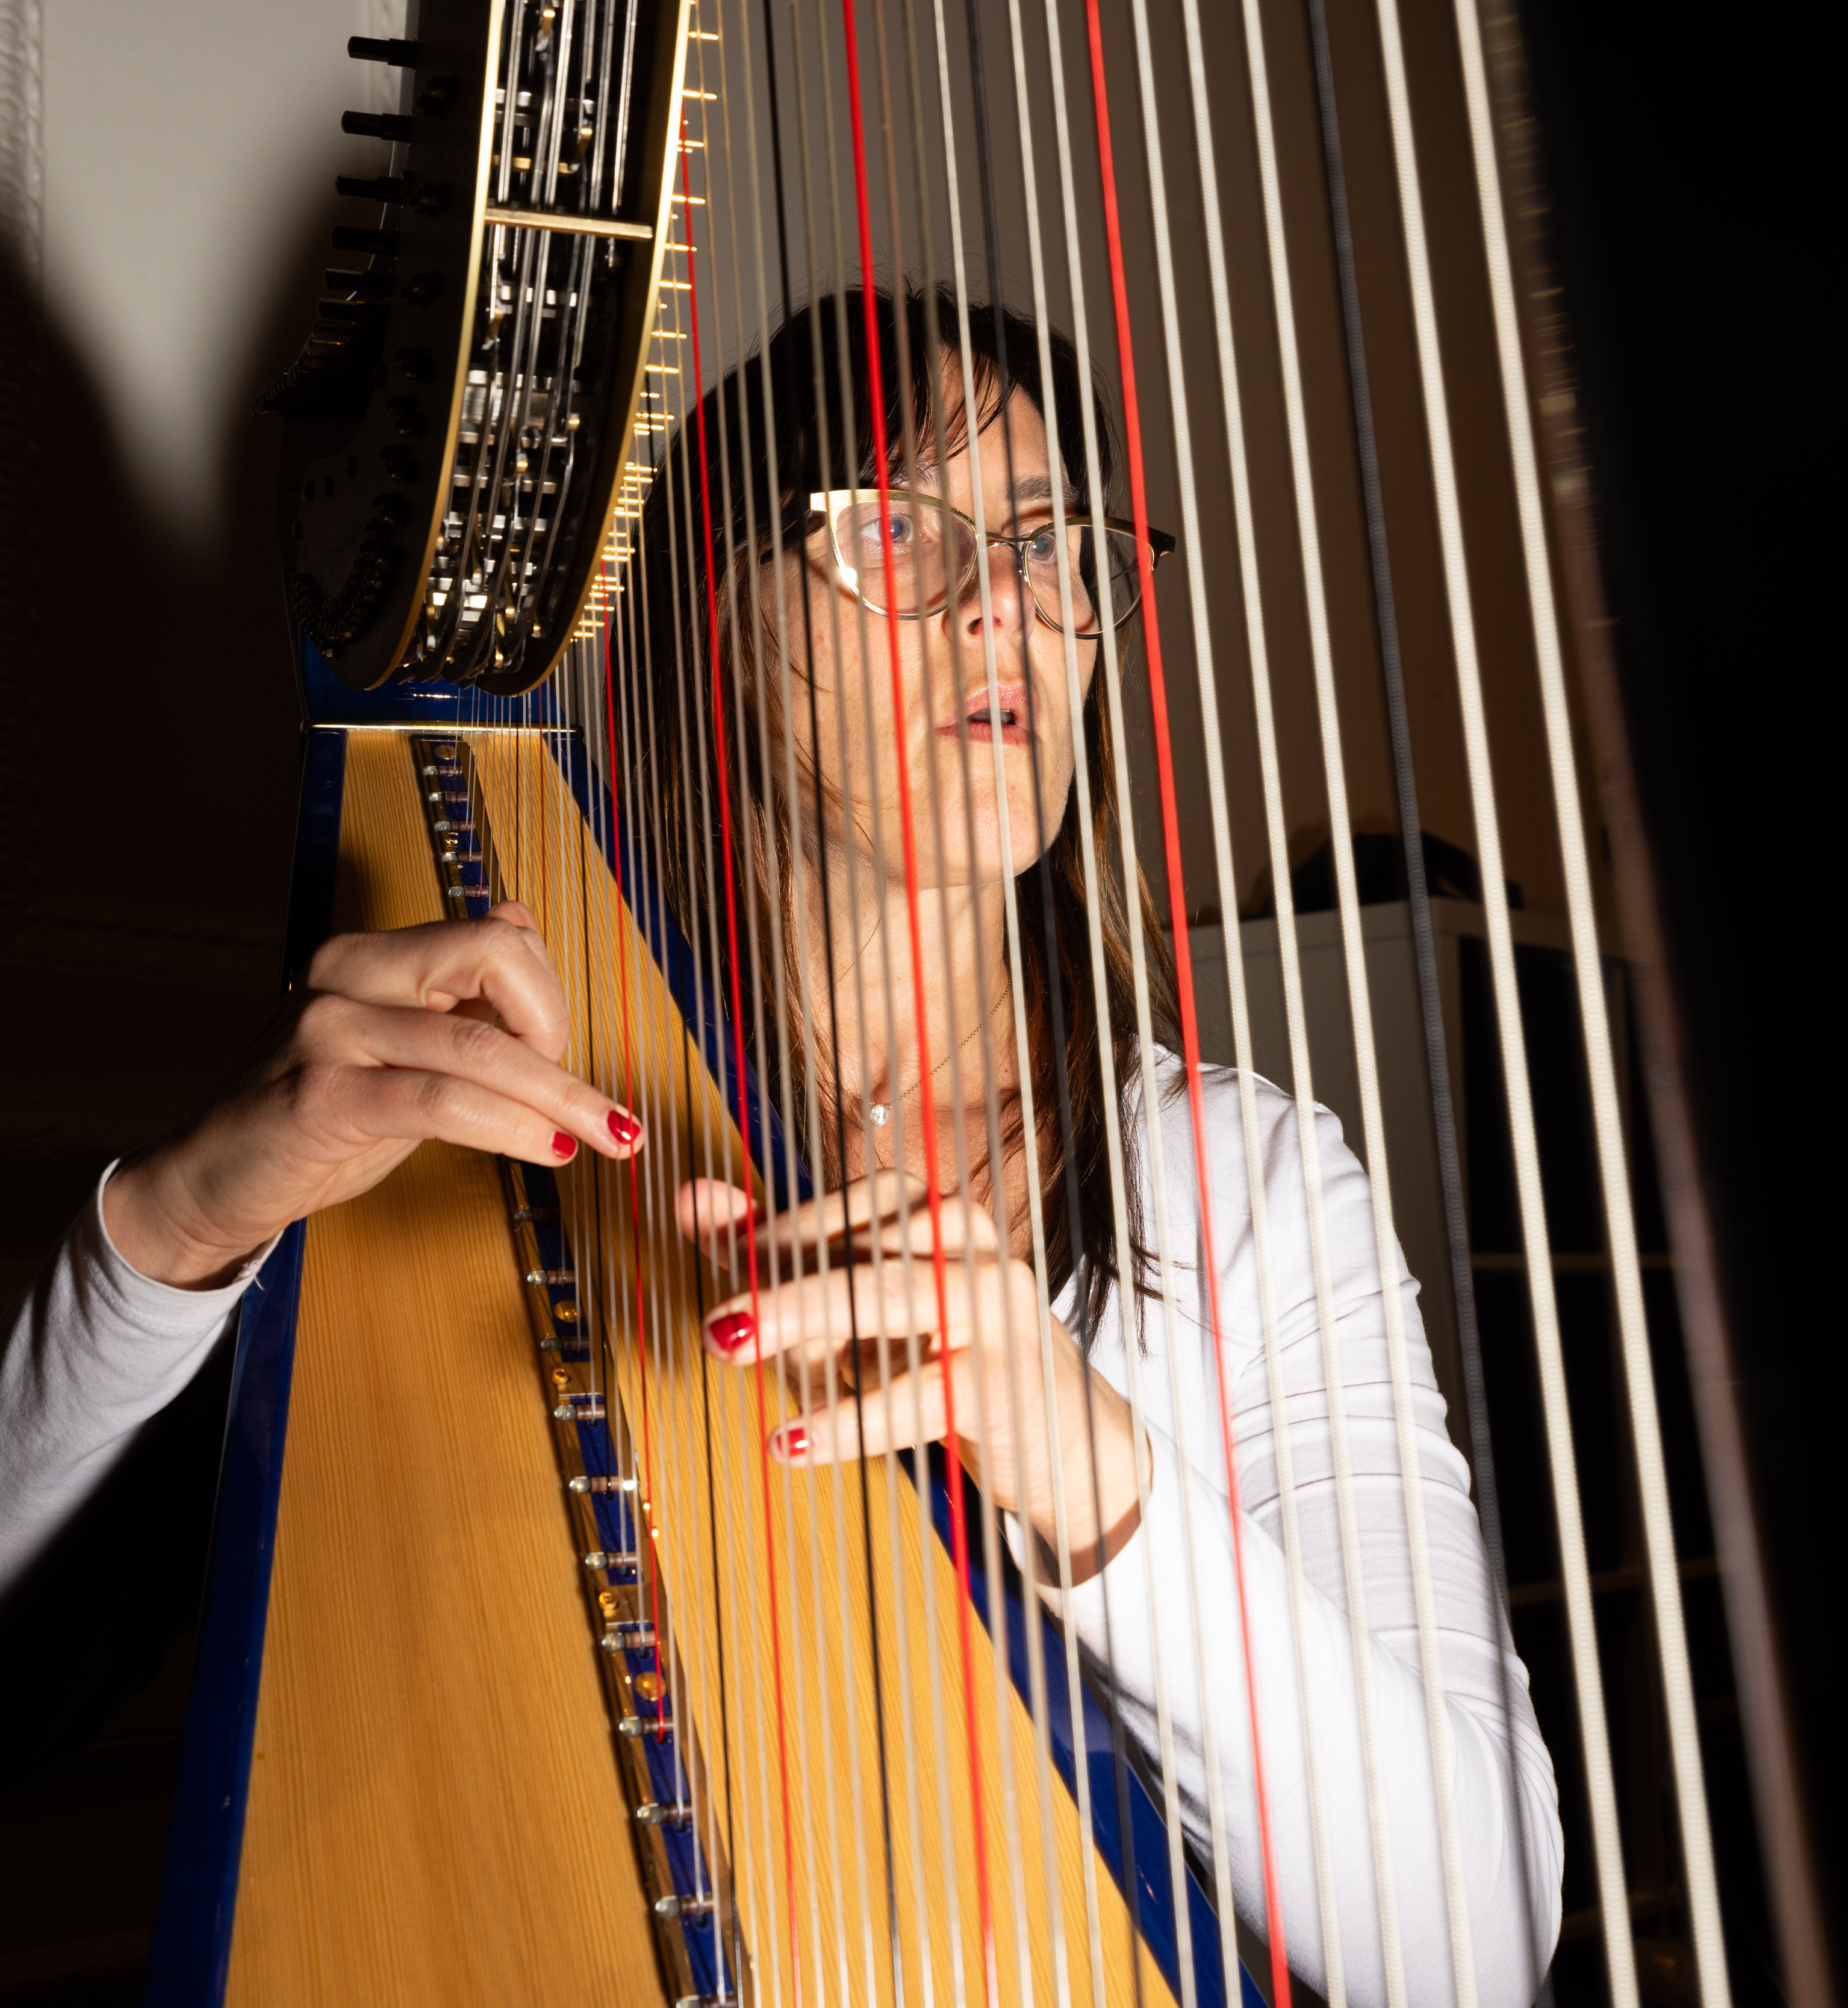 A person with glasses and red nail polish is playing a large harp, focusing intently on the instrument. The harp strings partially obscure their face.